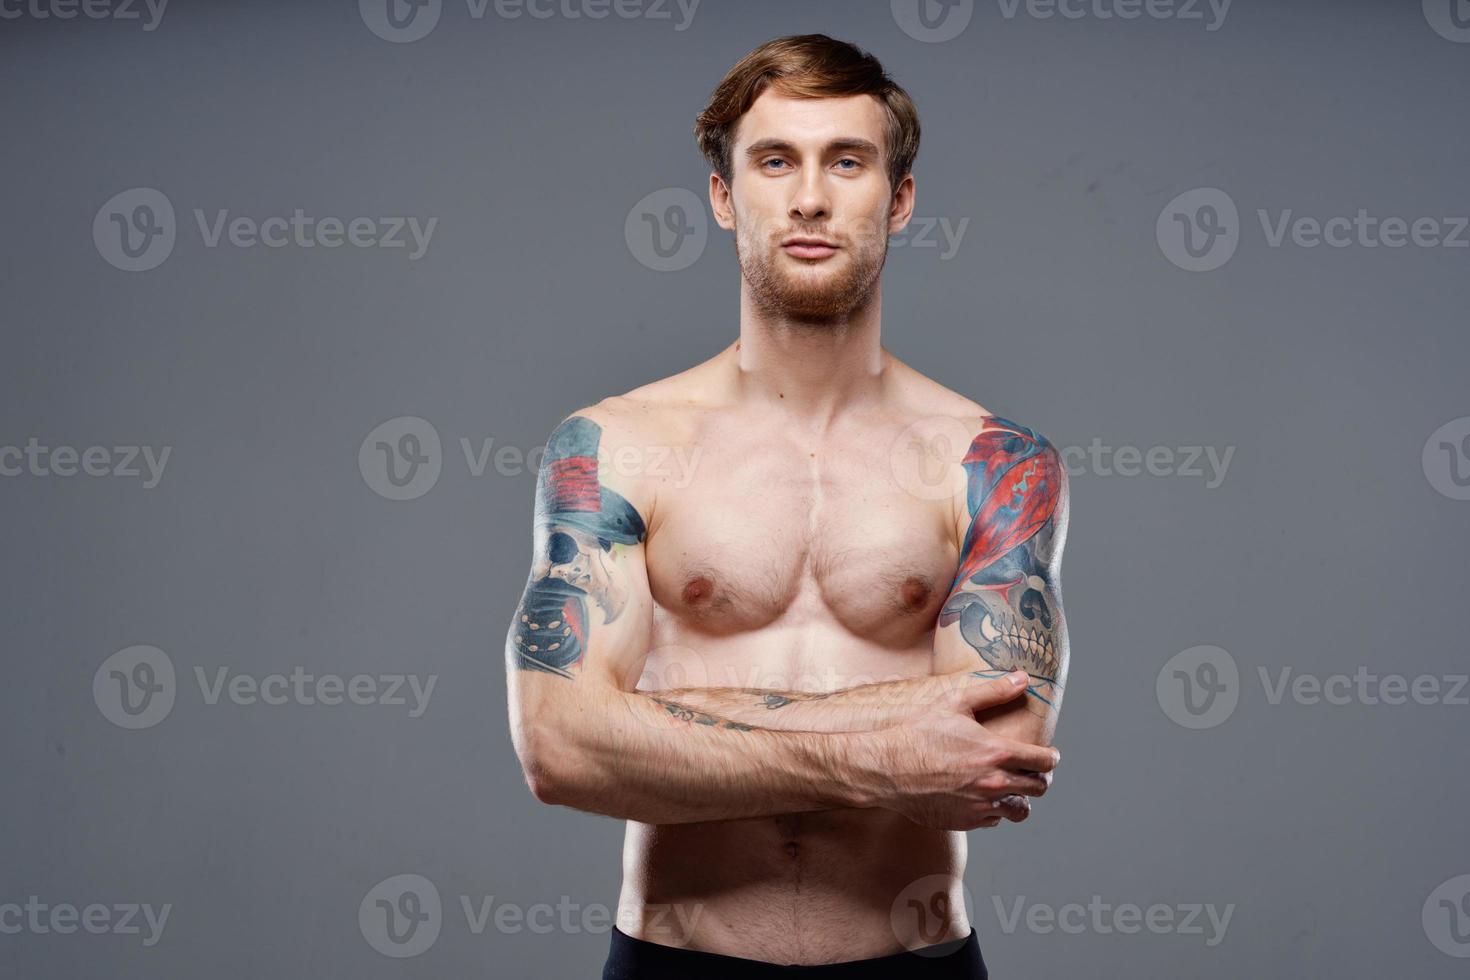 man with tattoos on his arms pumped up torso workout cropped view bodybuilder photo